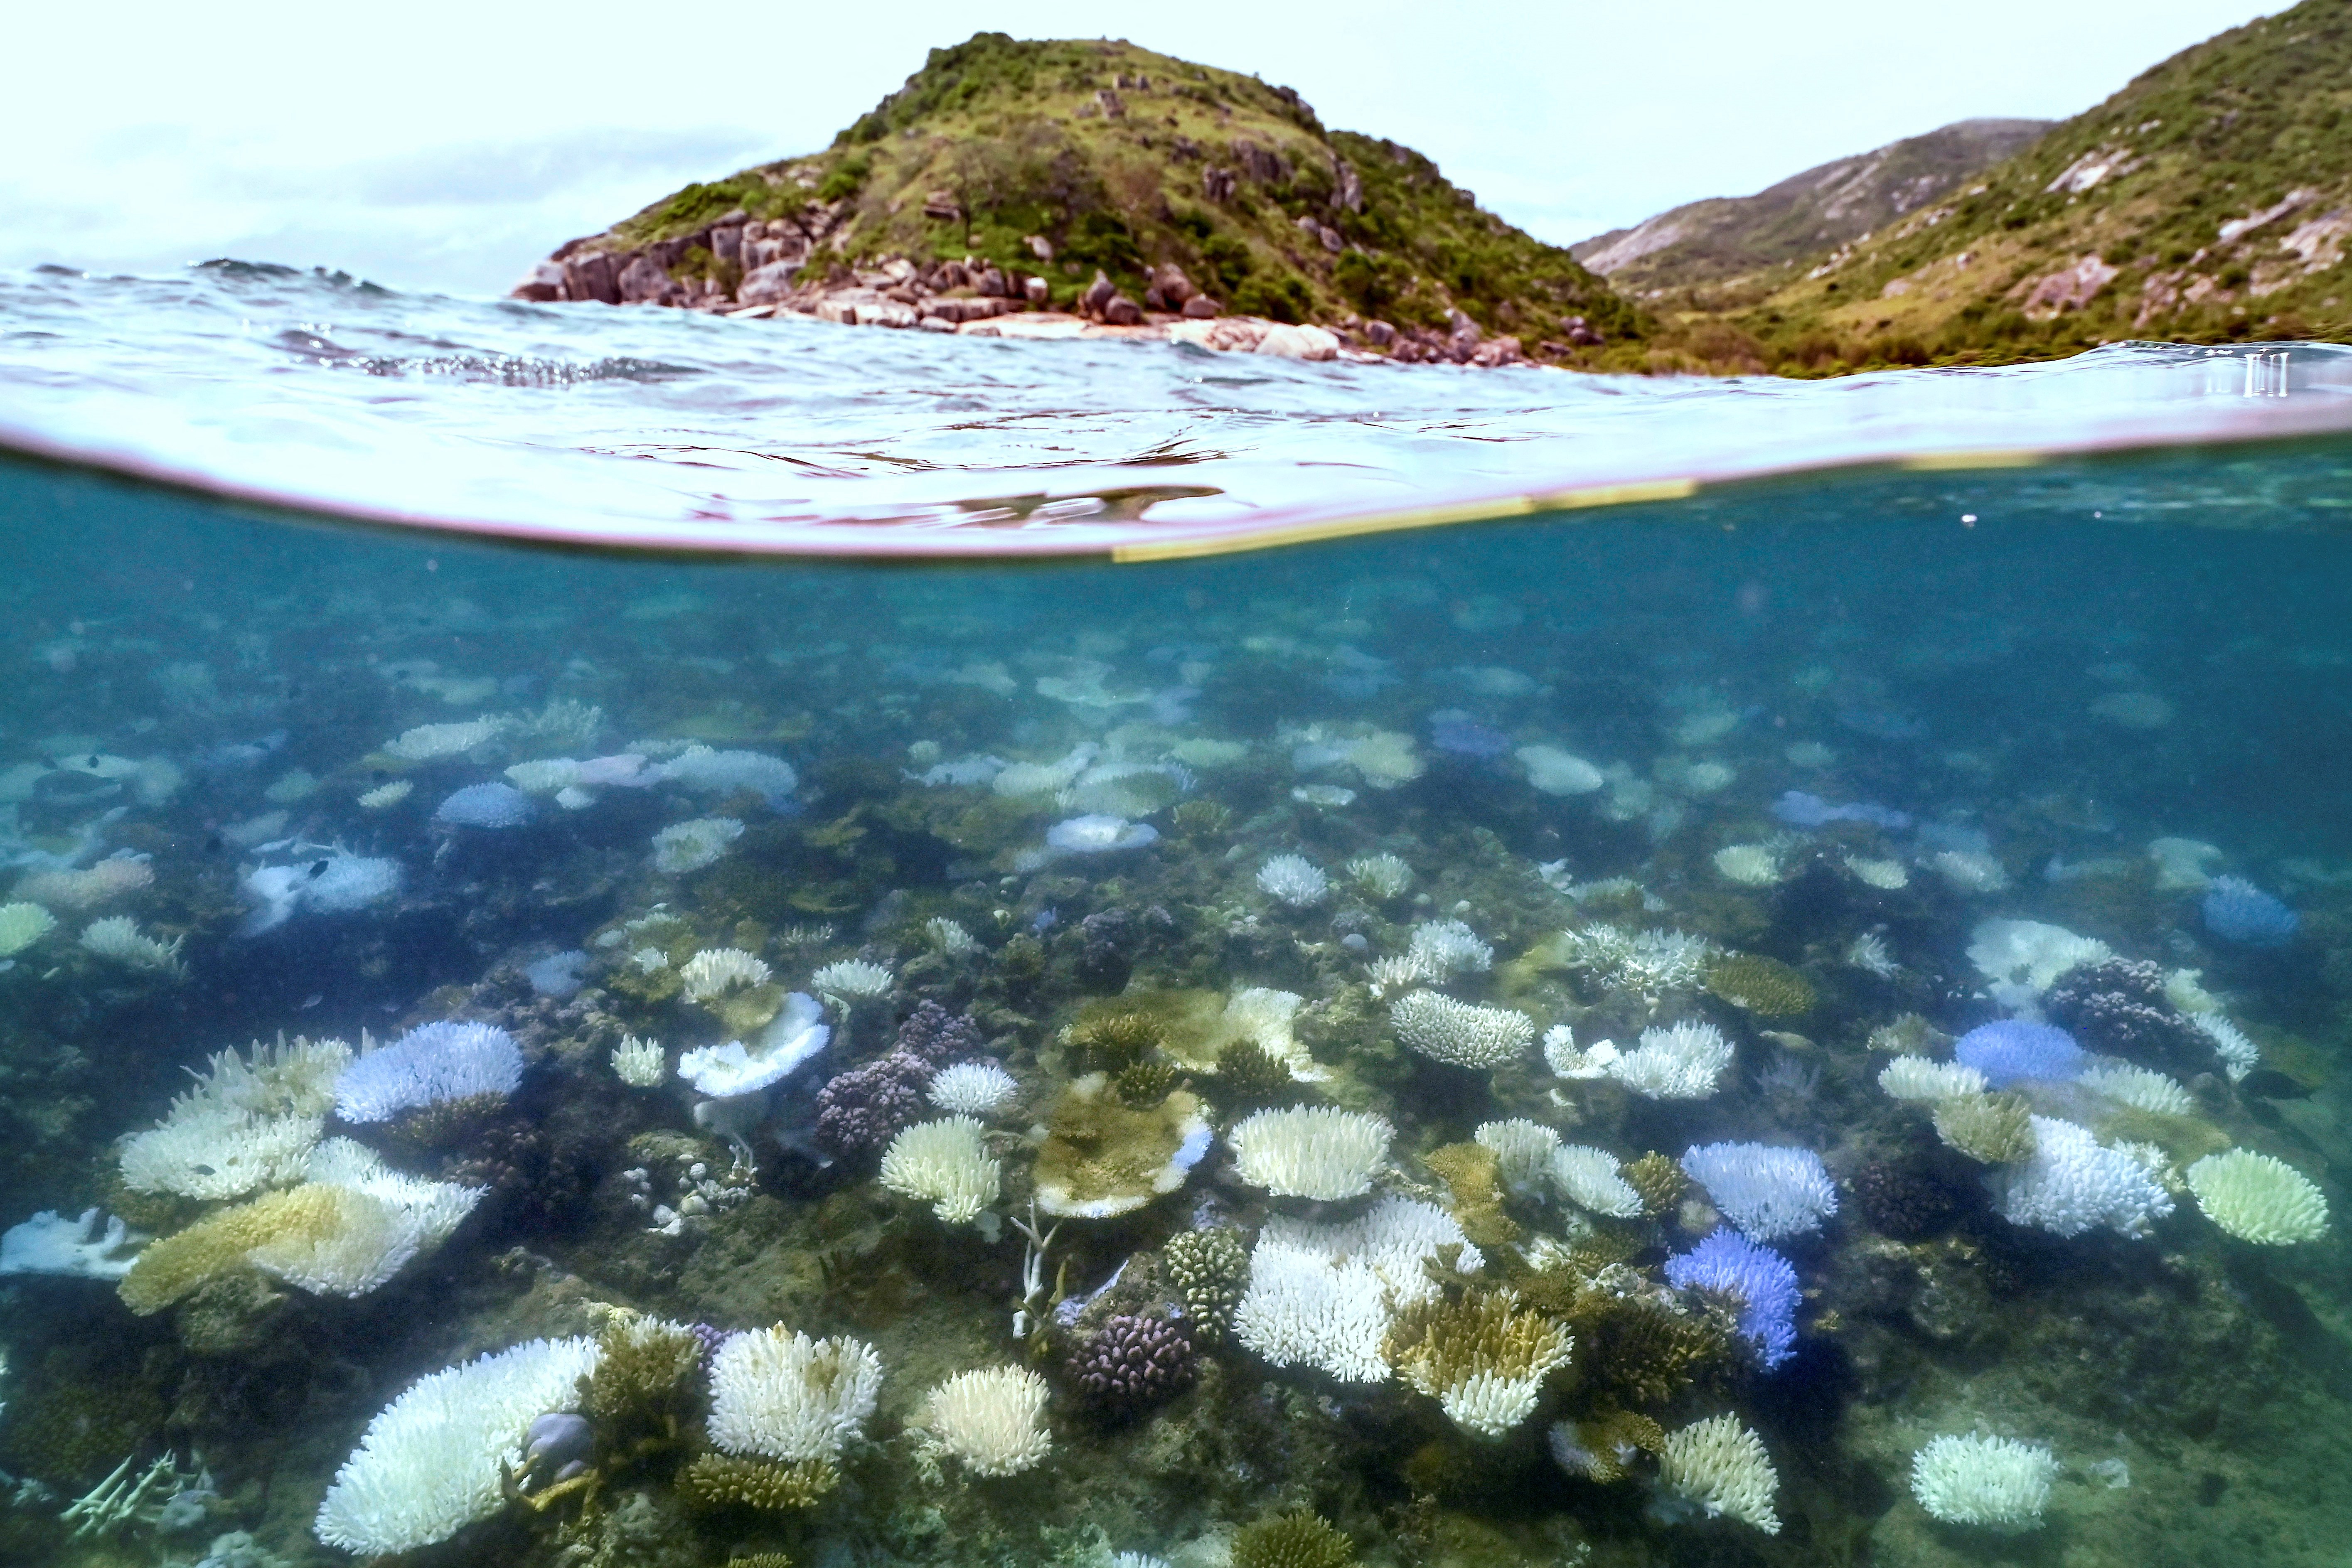 An underwater photo shows bleached and dead coral around Lizard Island on the Great Barrier Reef. Land can be seen in the background.